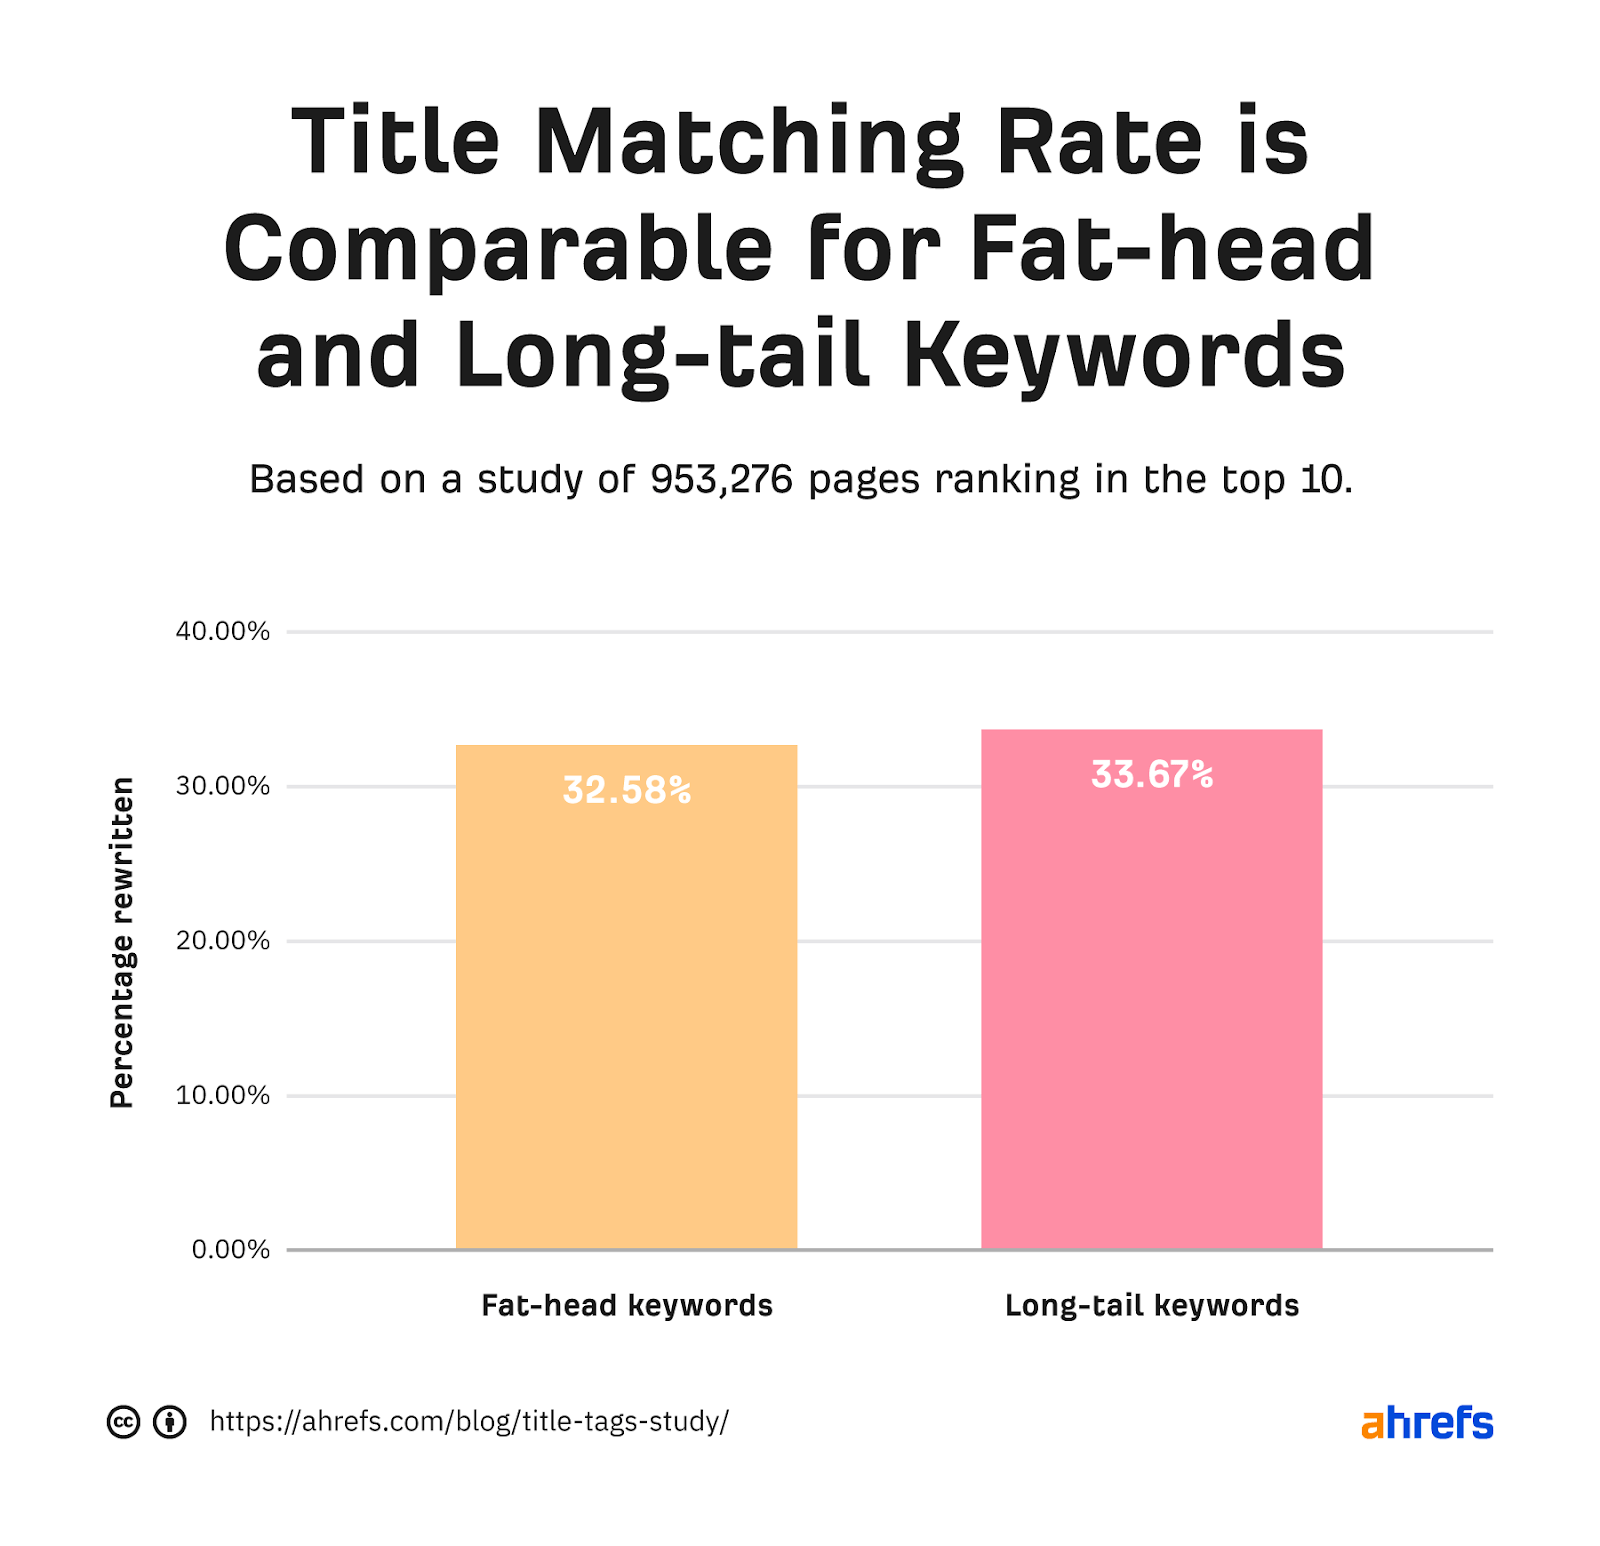 Bar chart showing title matching rate is comparable for fat-head (32.58%) and long-tail (33.67%) keywords